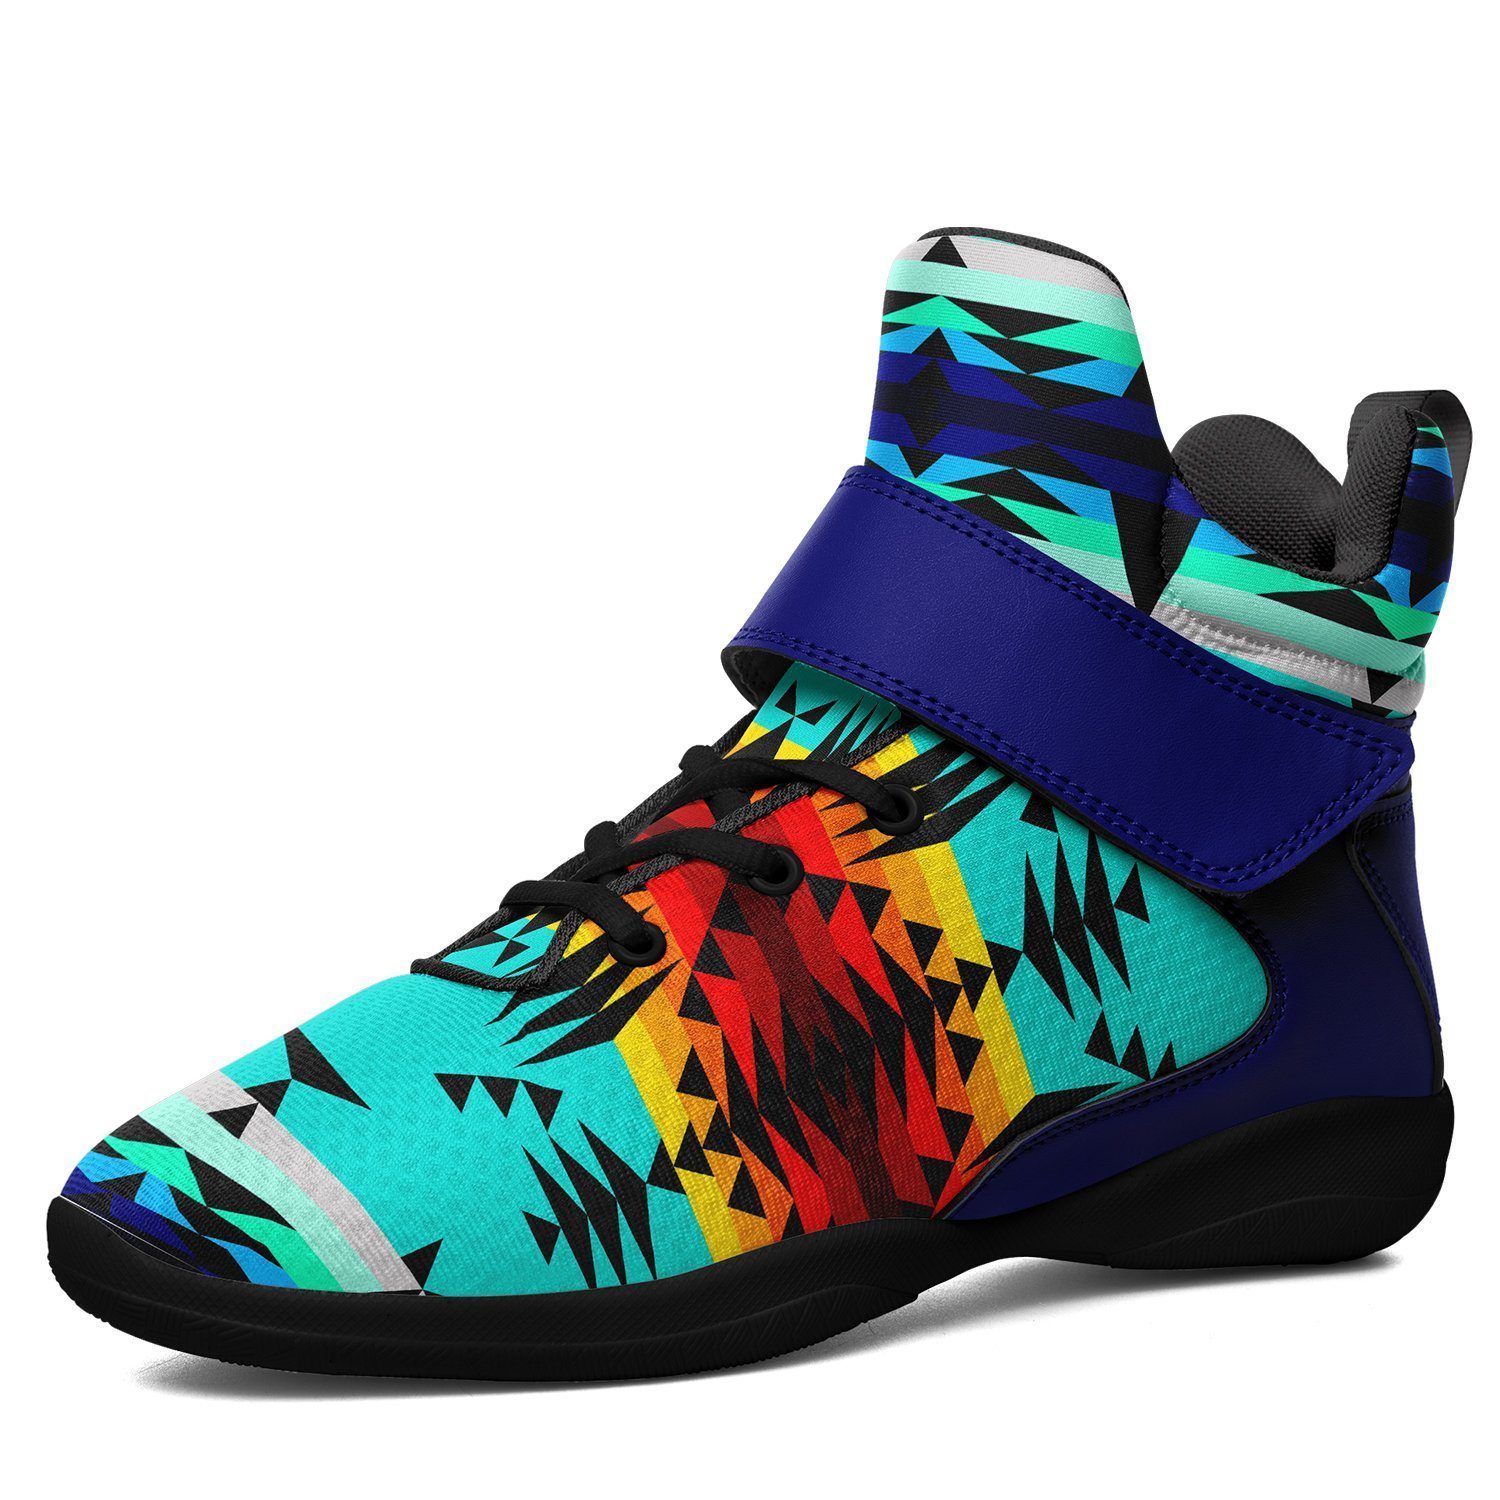 Between the Mountains Ipottaa Basketball / Sport High Top Shoes - Black Sole 49 Dzine US Men 7 / EUR 40 Black Sole with Blue Strap 